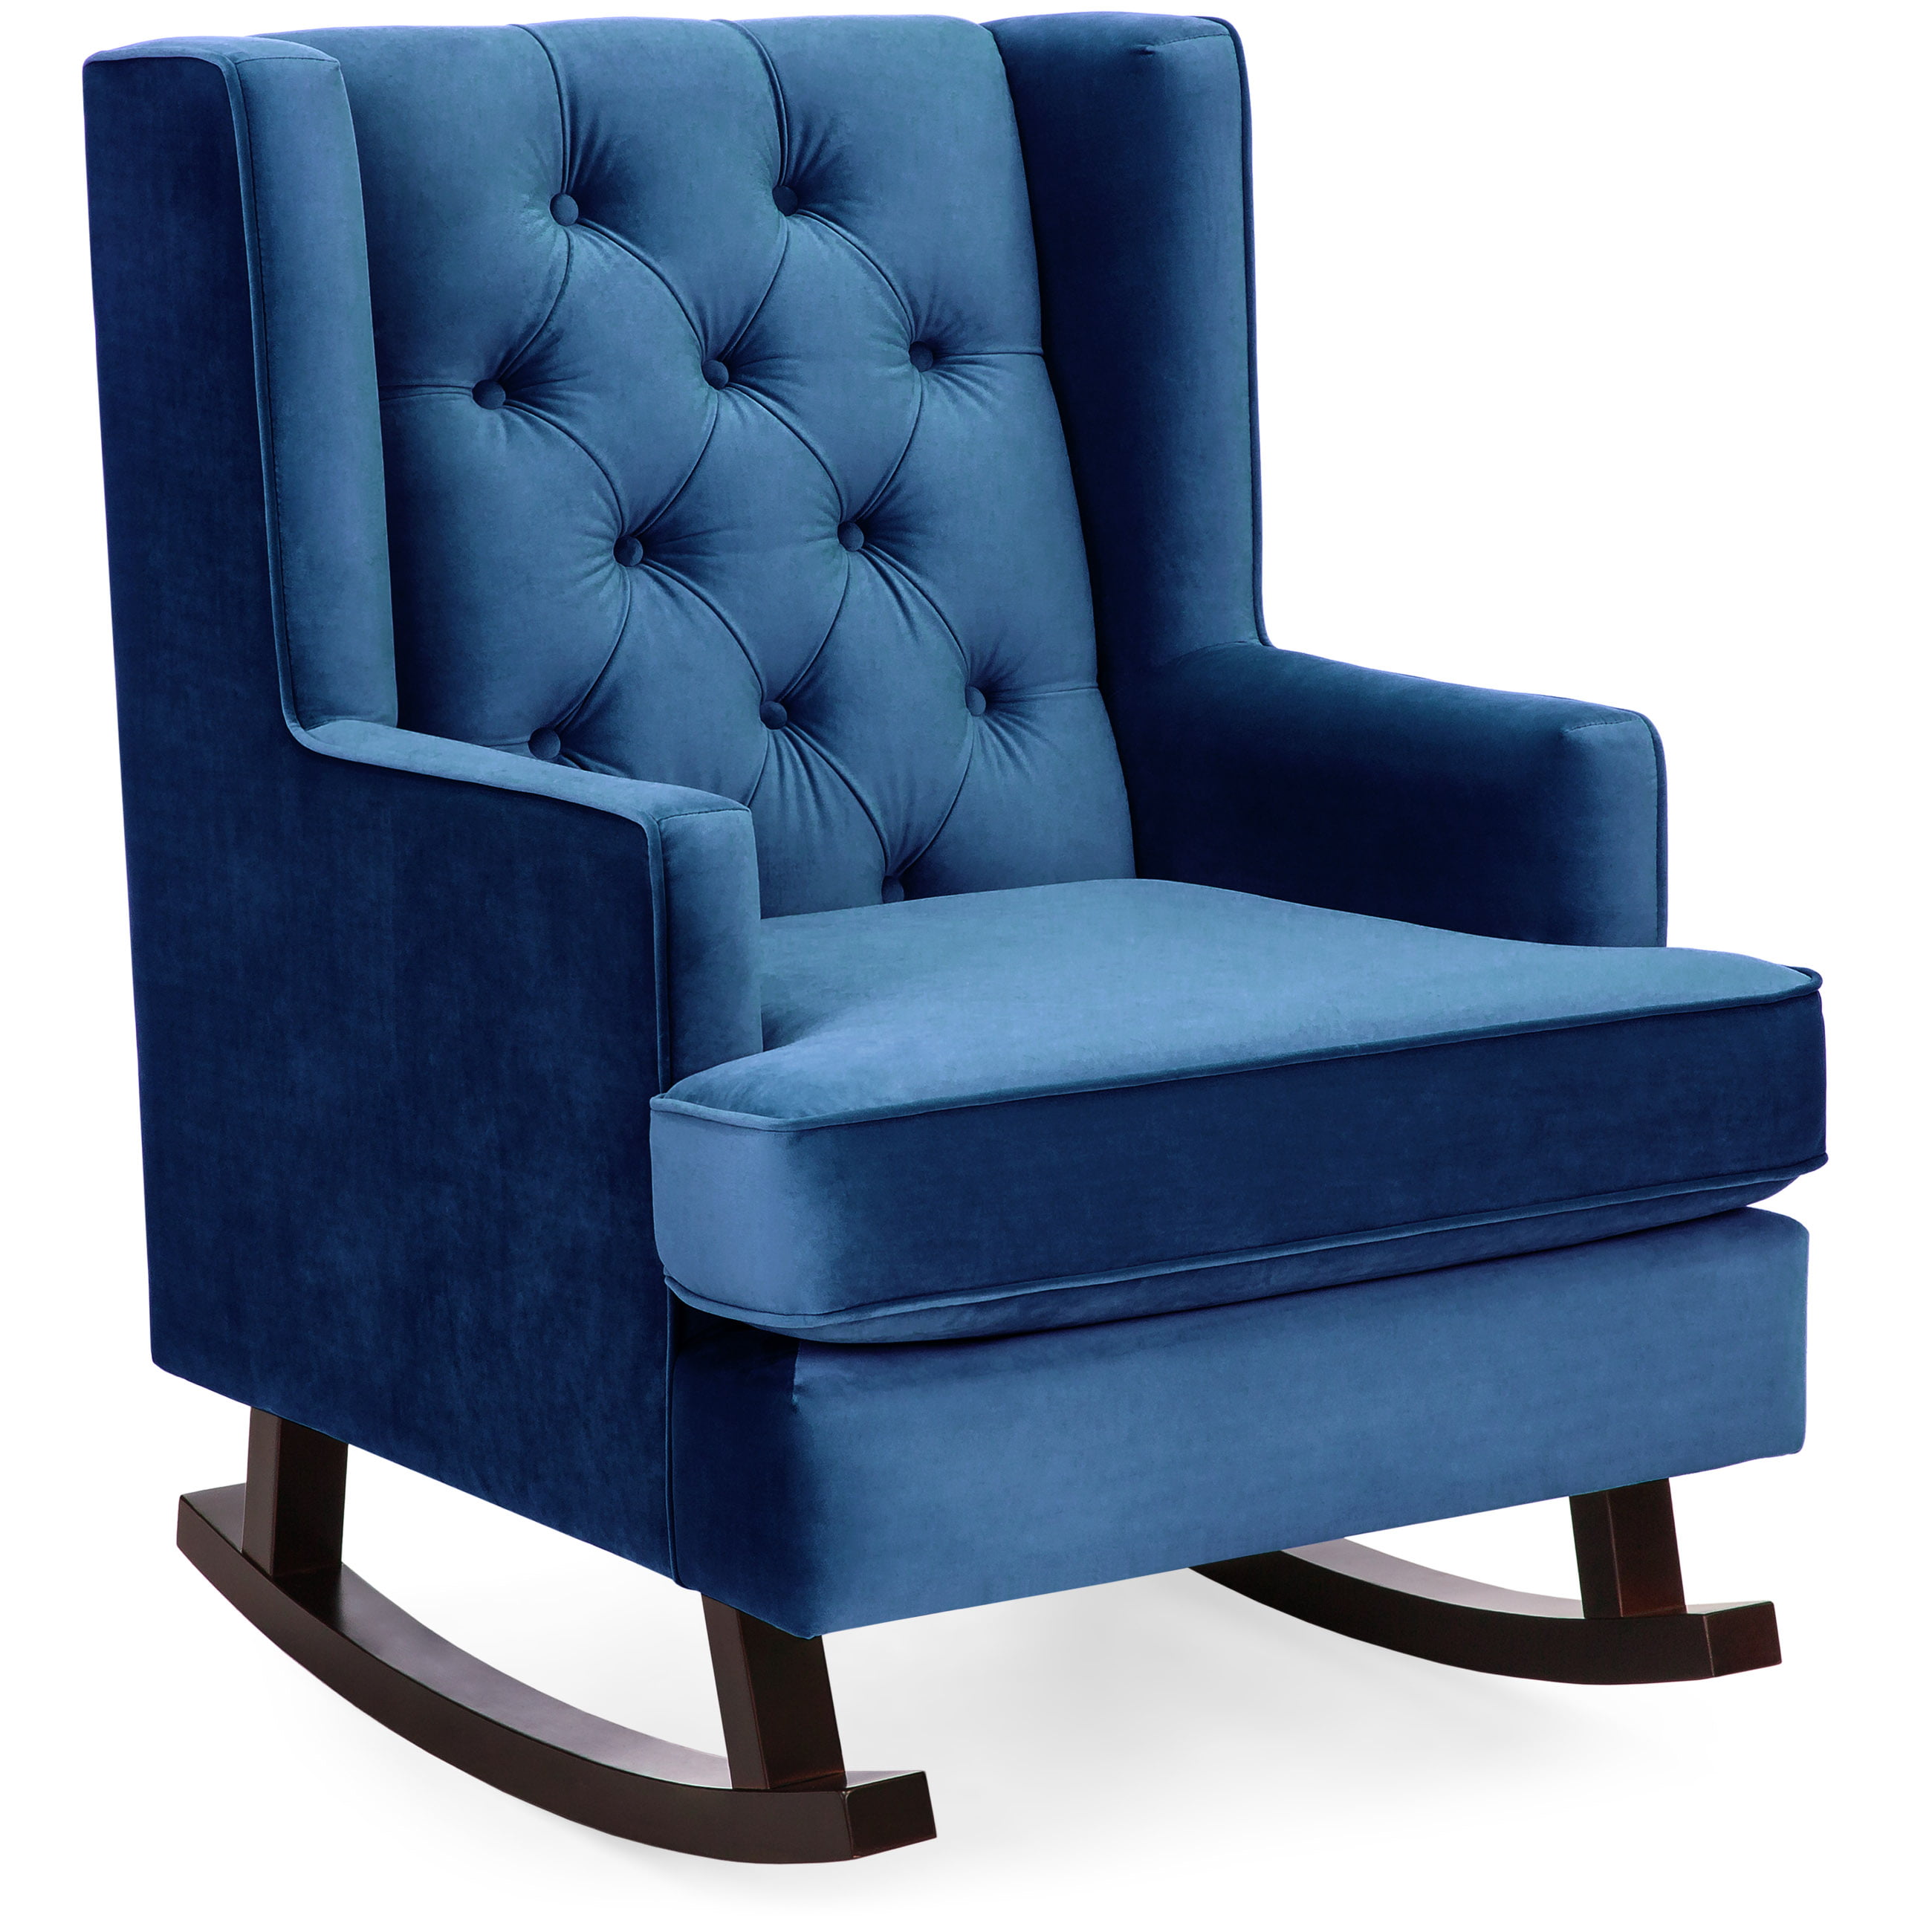 Best Choice Products Tufted Luxury Velvet Wingback Rocking